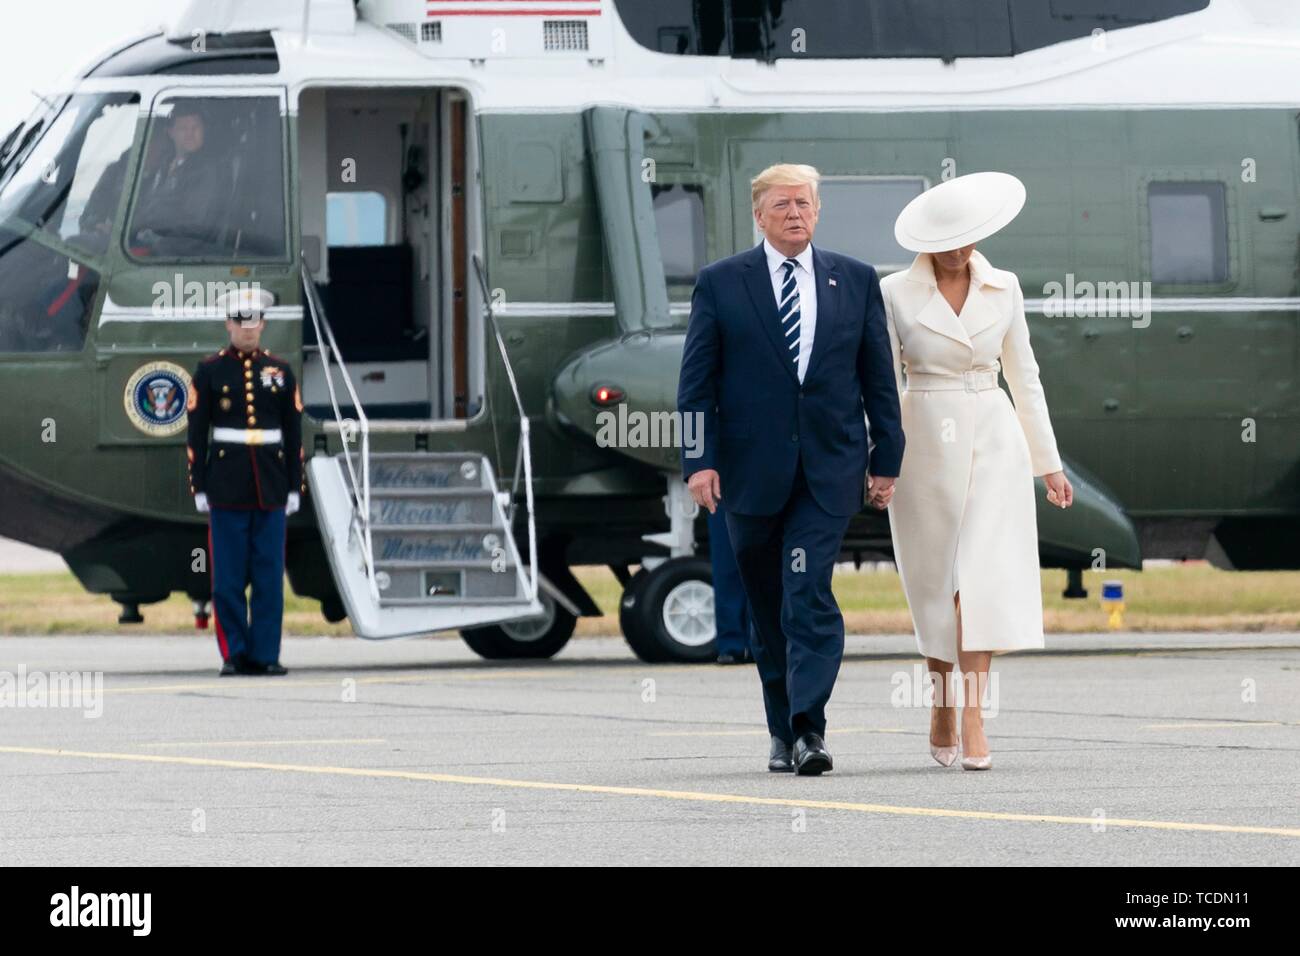 U.S President Donald Trump and First Lady Melania Trump walk to Air Force One after landing aboard Marine One at Southampton Airport June 5, 2019 in Southhampton, England. The first couple are departing to spend the night at the presidents golf resort in Doonbeg, Ireland. Stock Photo